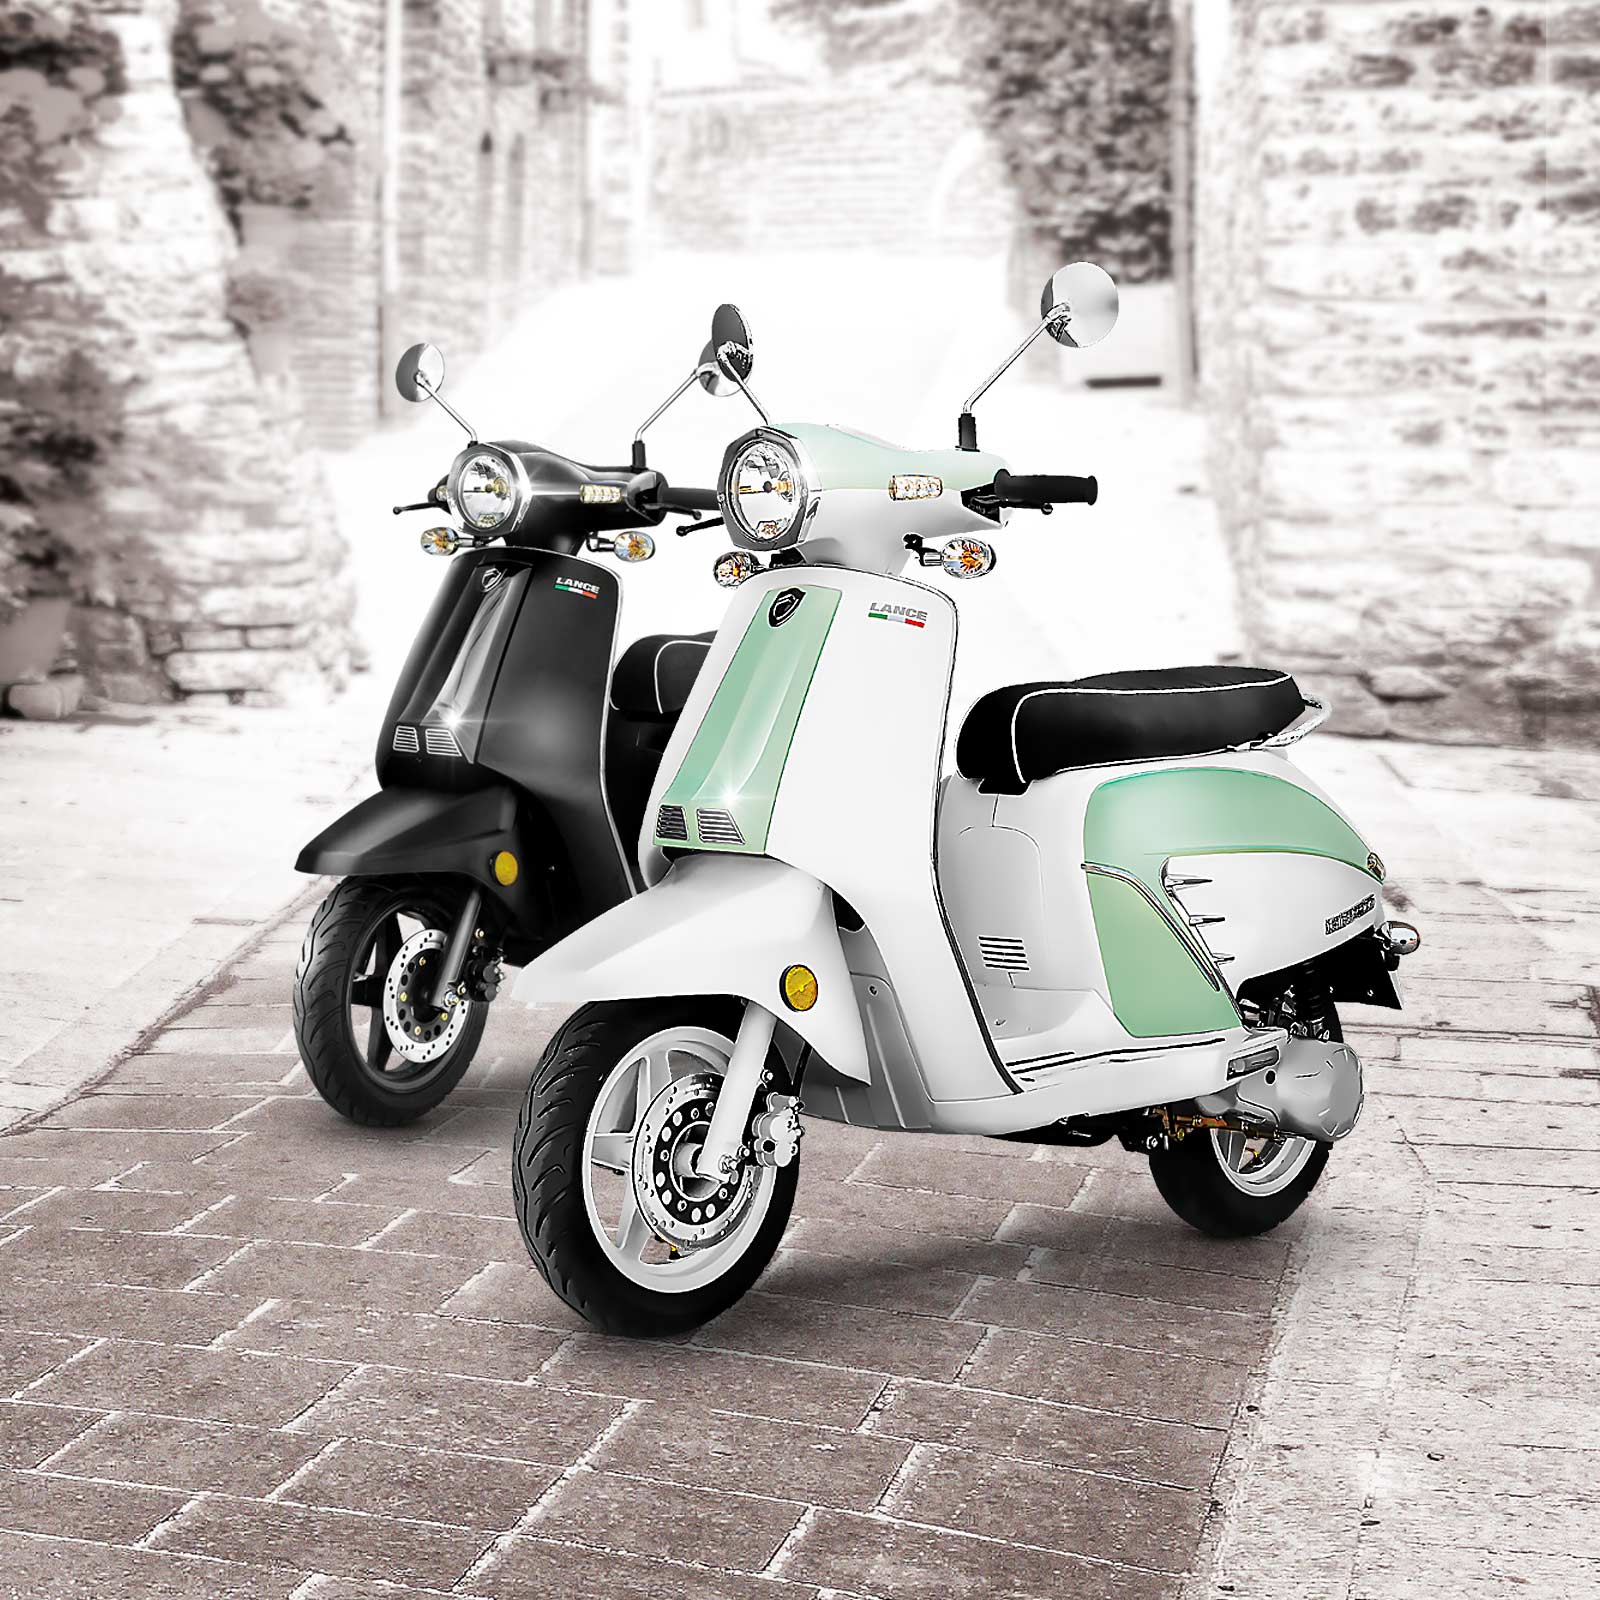 Lance Powersports., today announced the 2020 All-new Italia Classic 150, combined with the modern technology and retro classic style scooter.